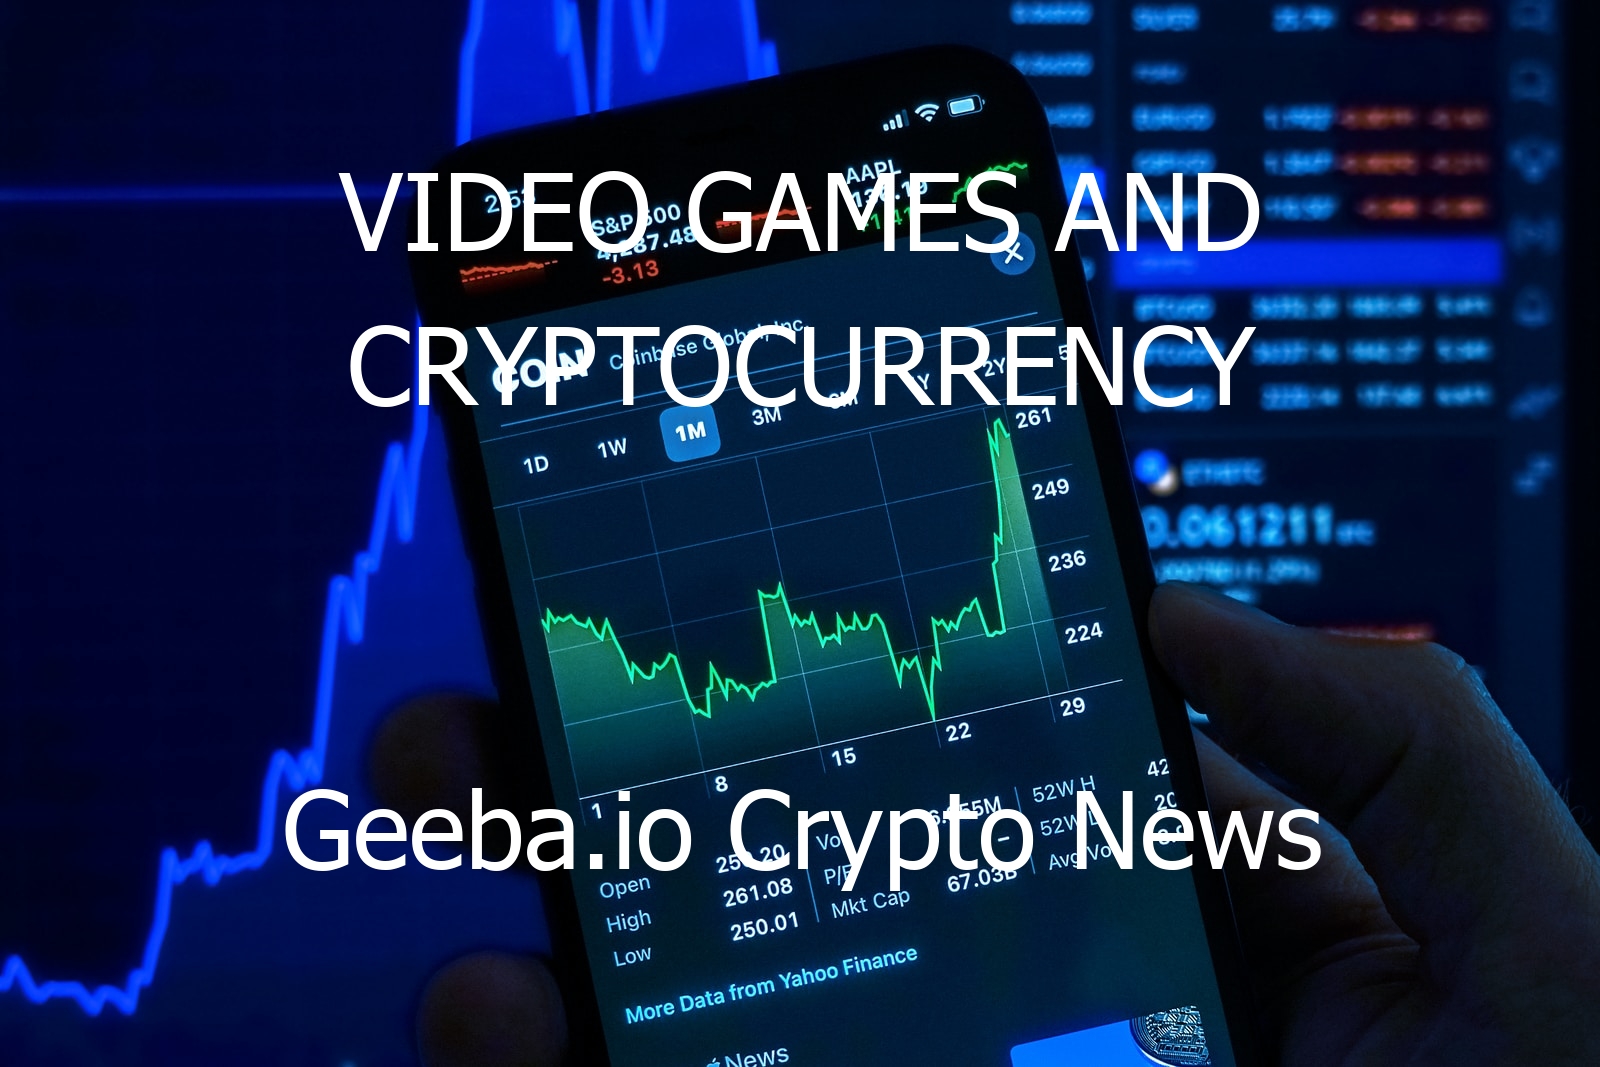 video games and cryptocurrency 5631